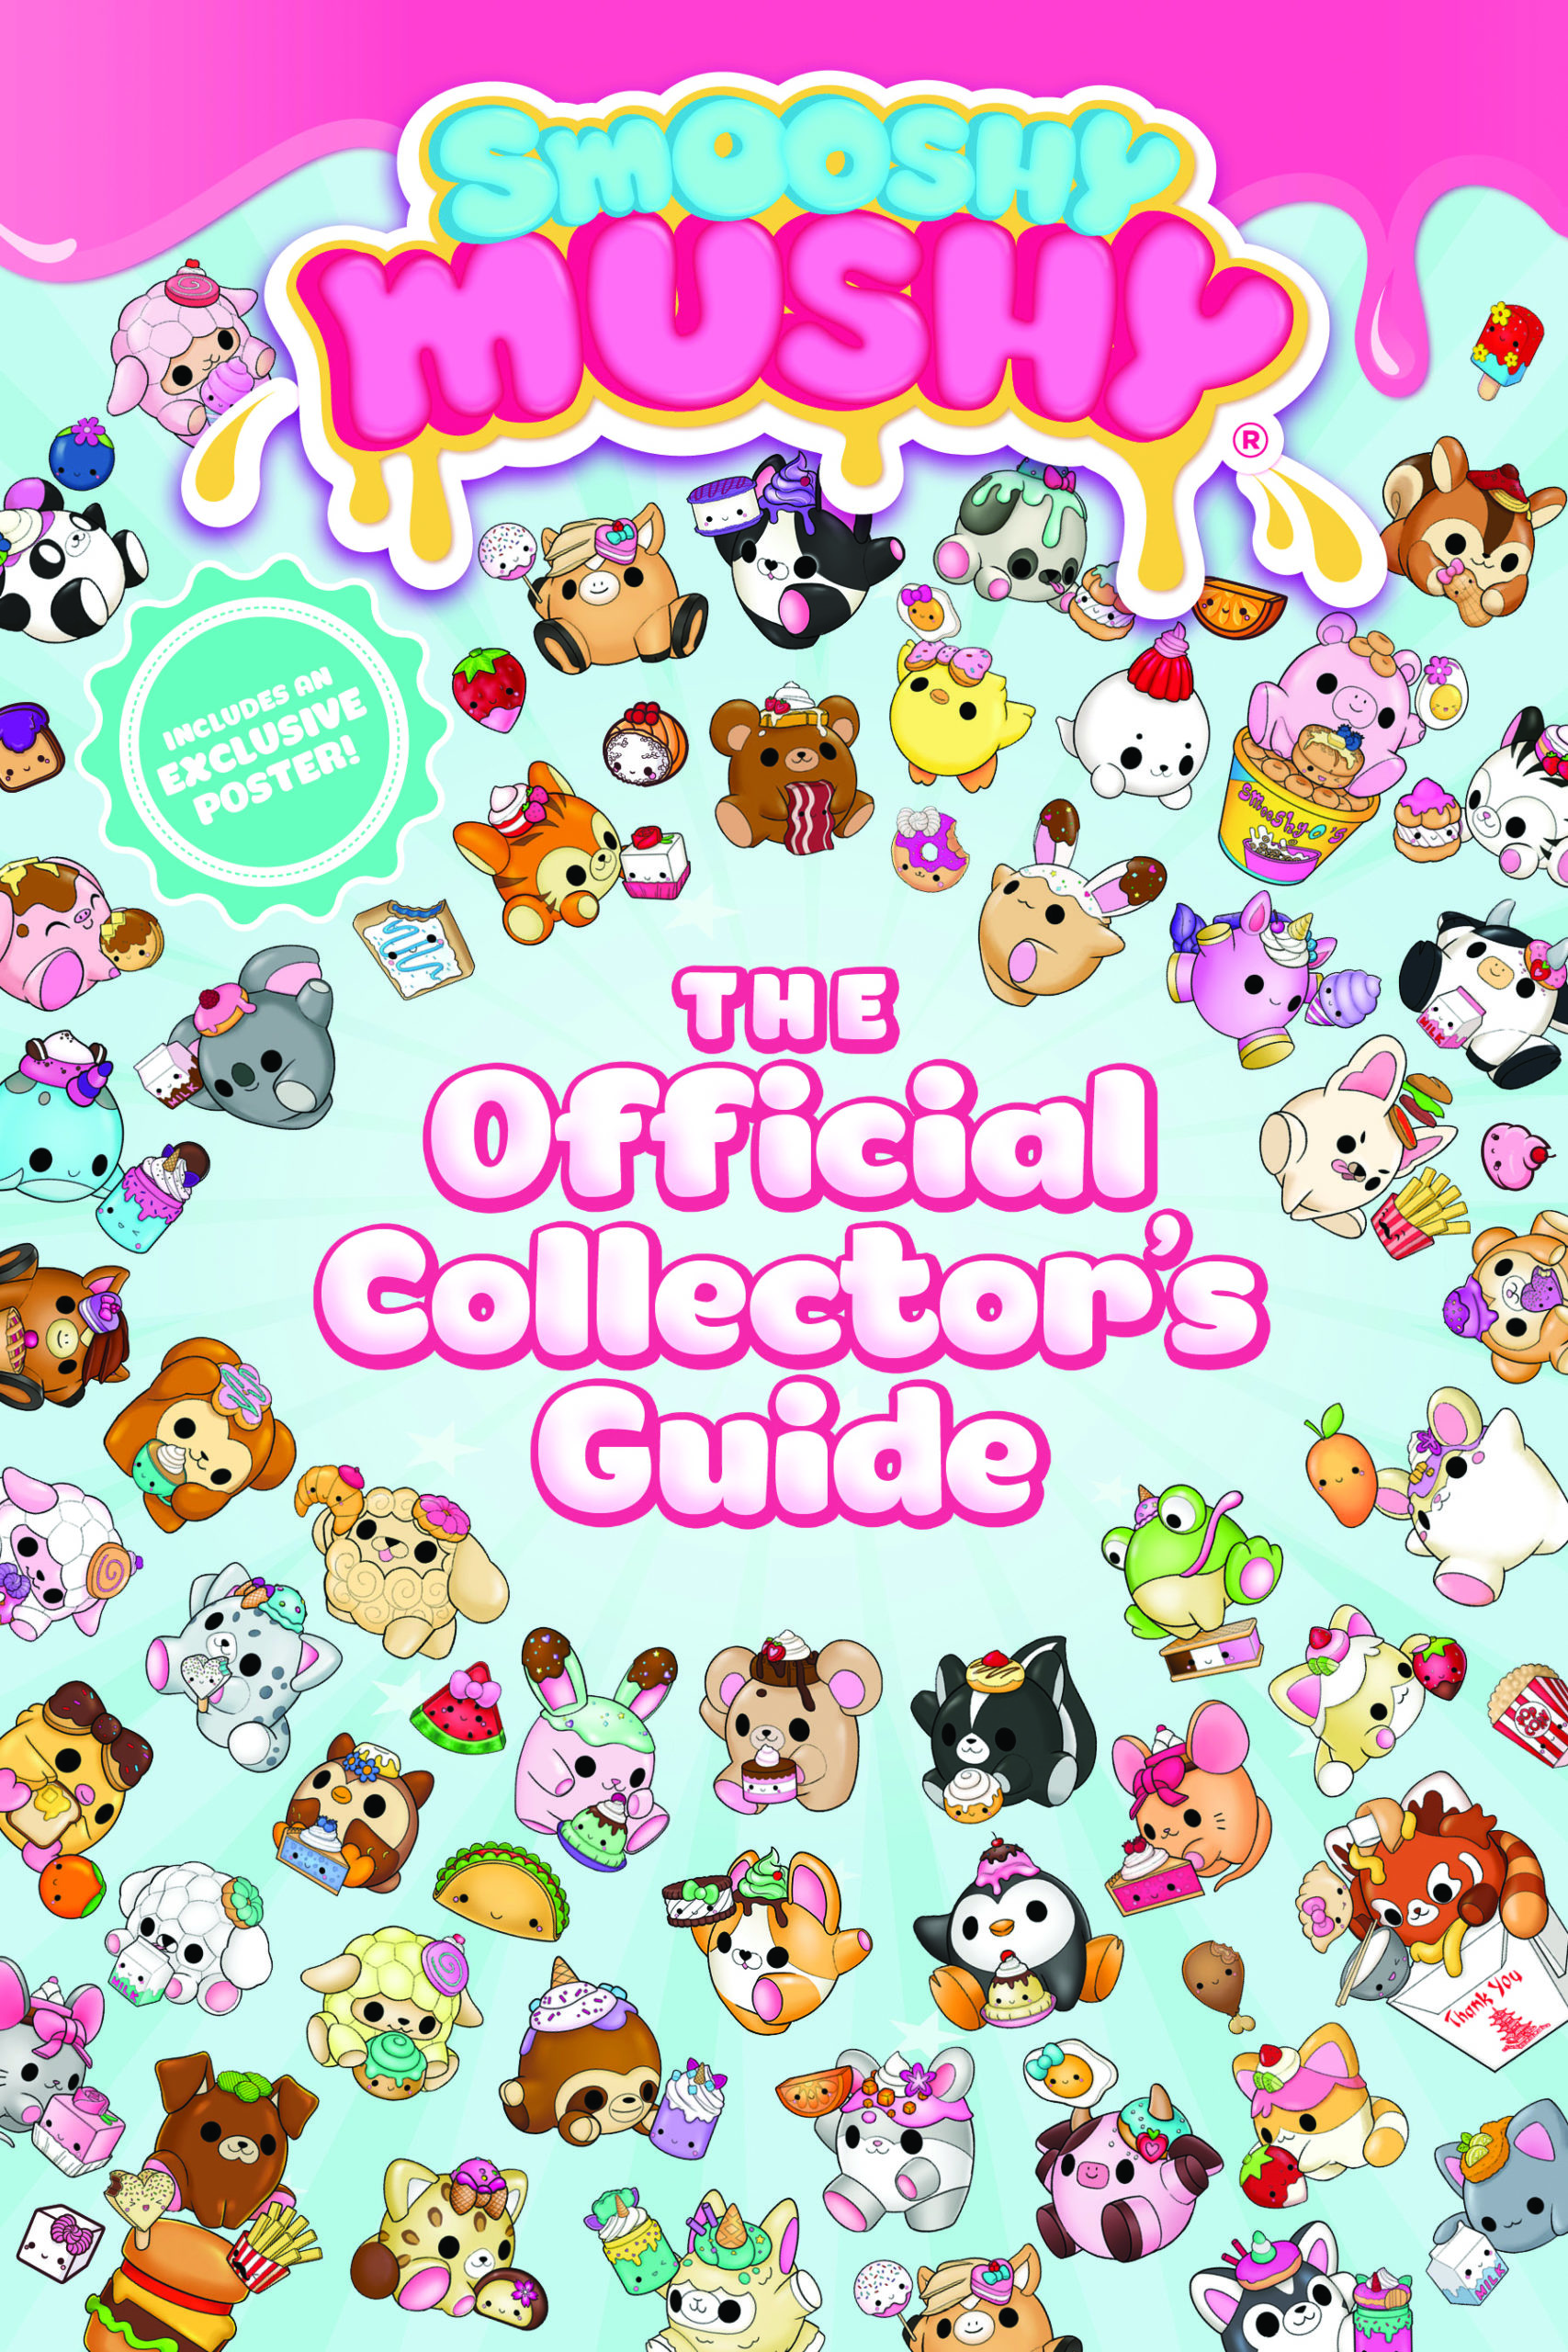 Smooshy Mushy: The Official Collector's Guide - little bee books